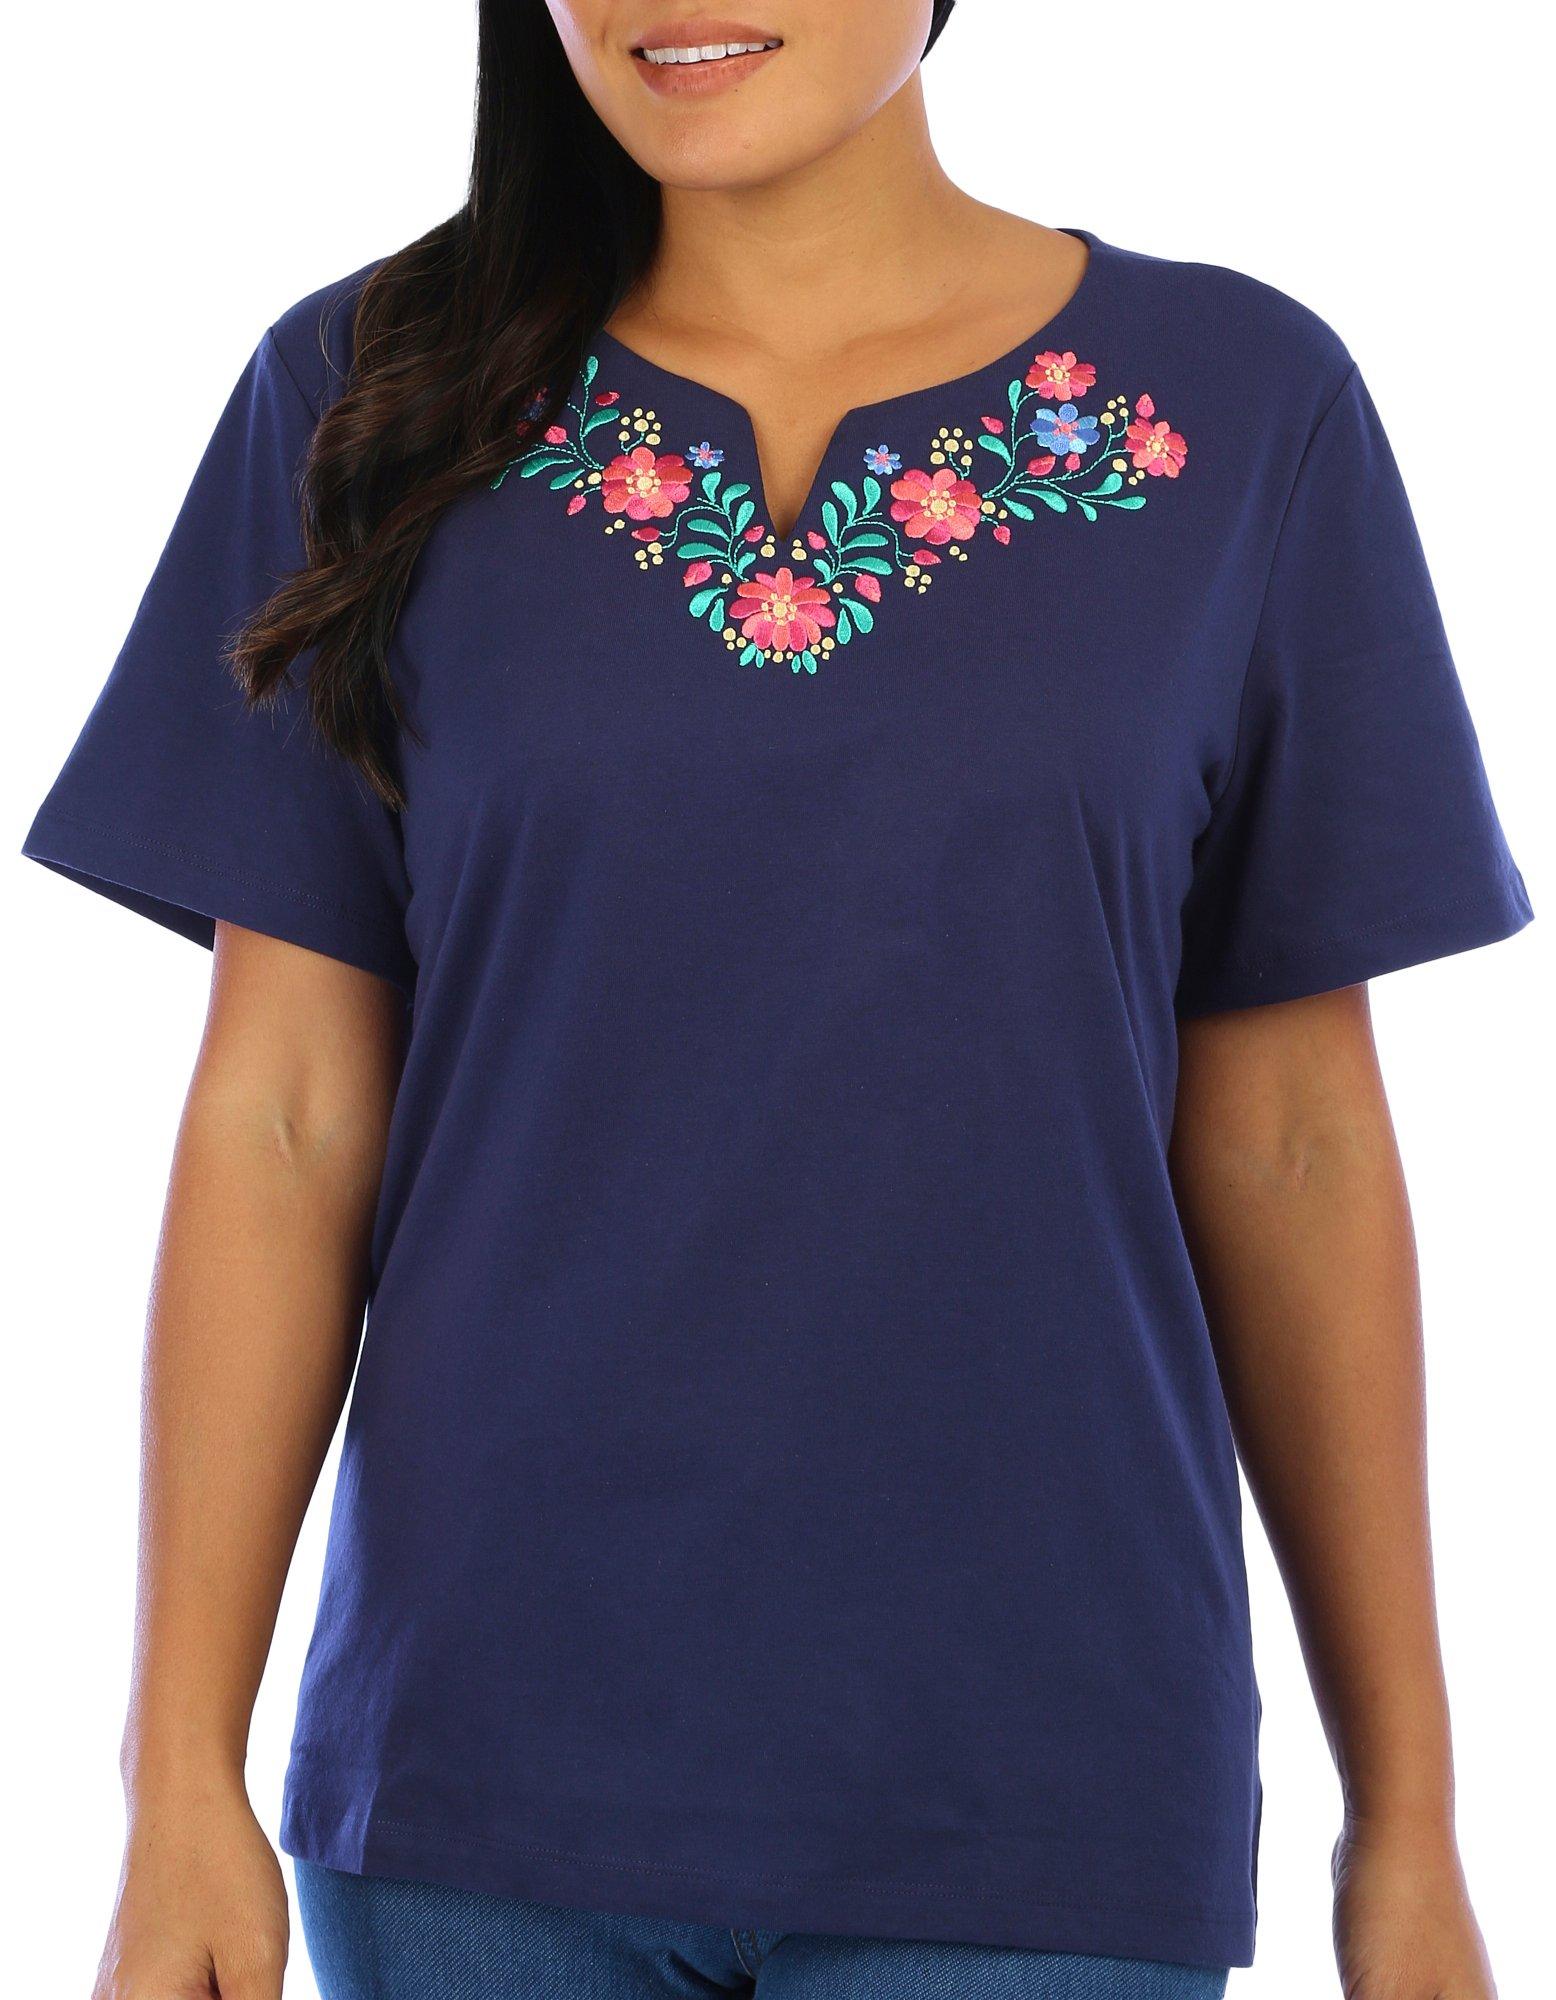 Womens Floral Embroidered Short Sleeve Top